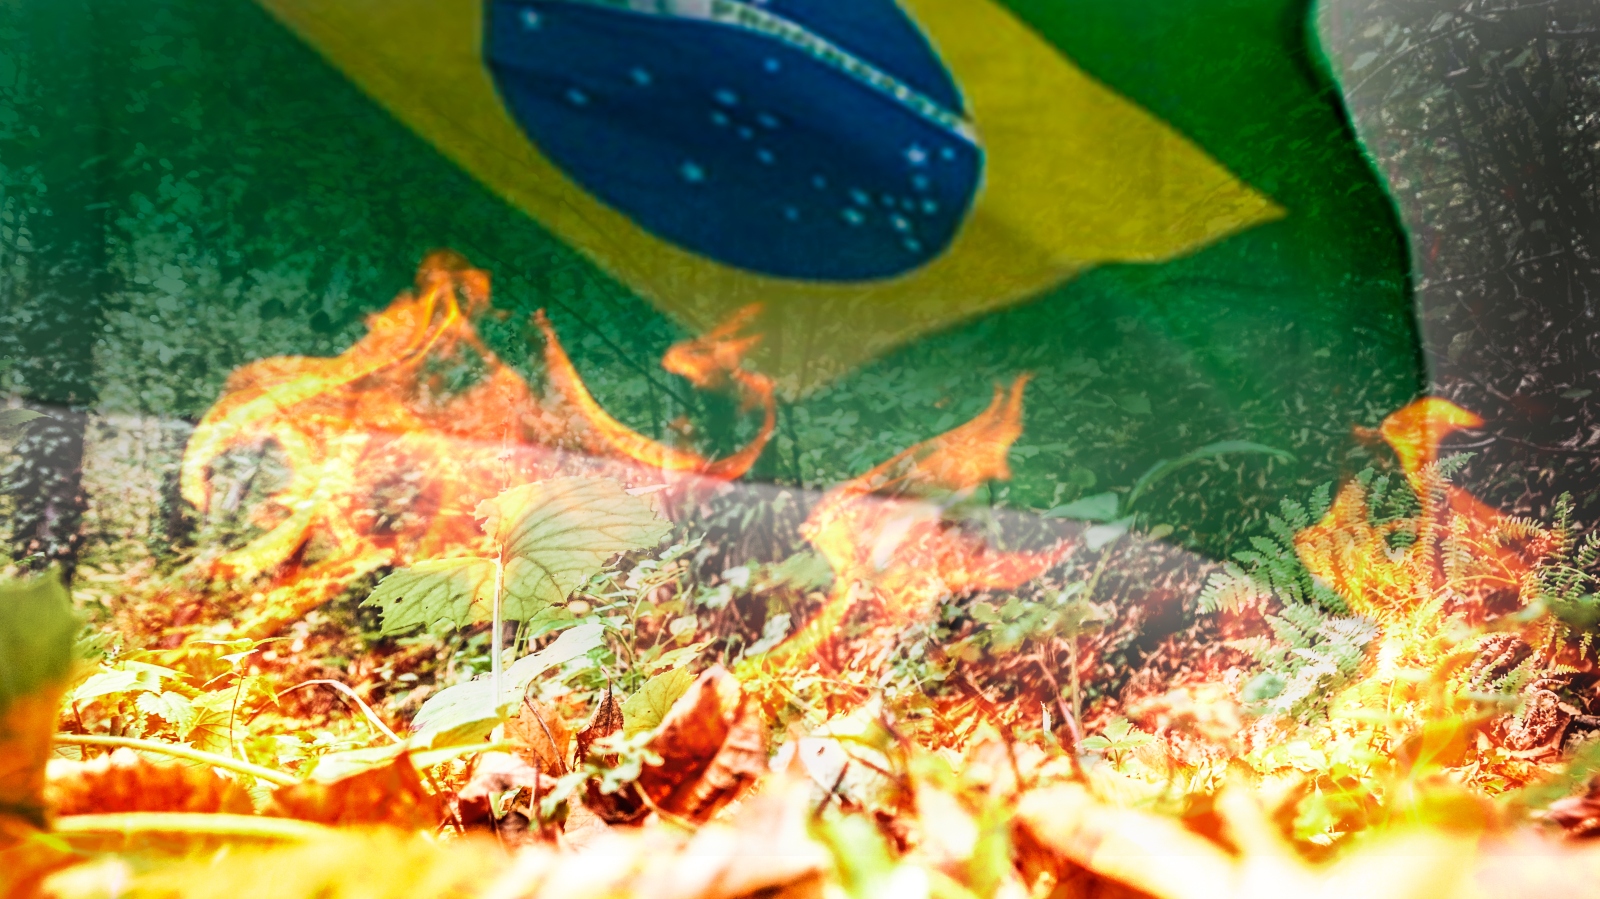 Raging tropical forest fire and the flag of Brazil. Image by Ivan Marc/Shutterstock.com